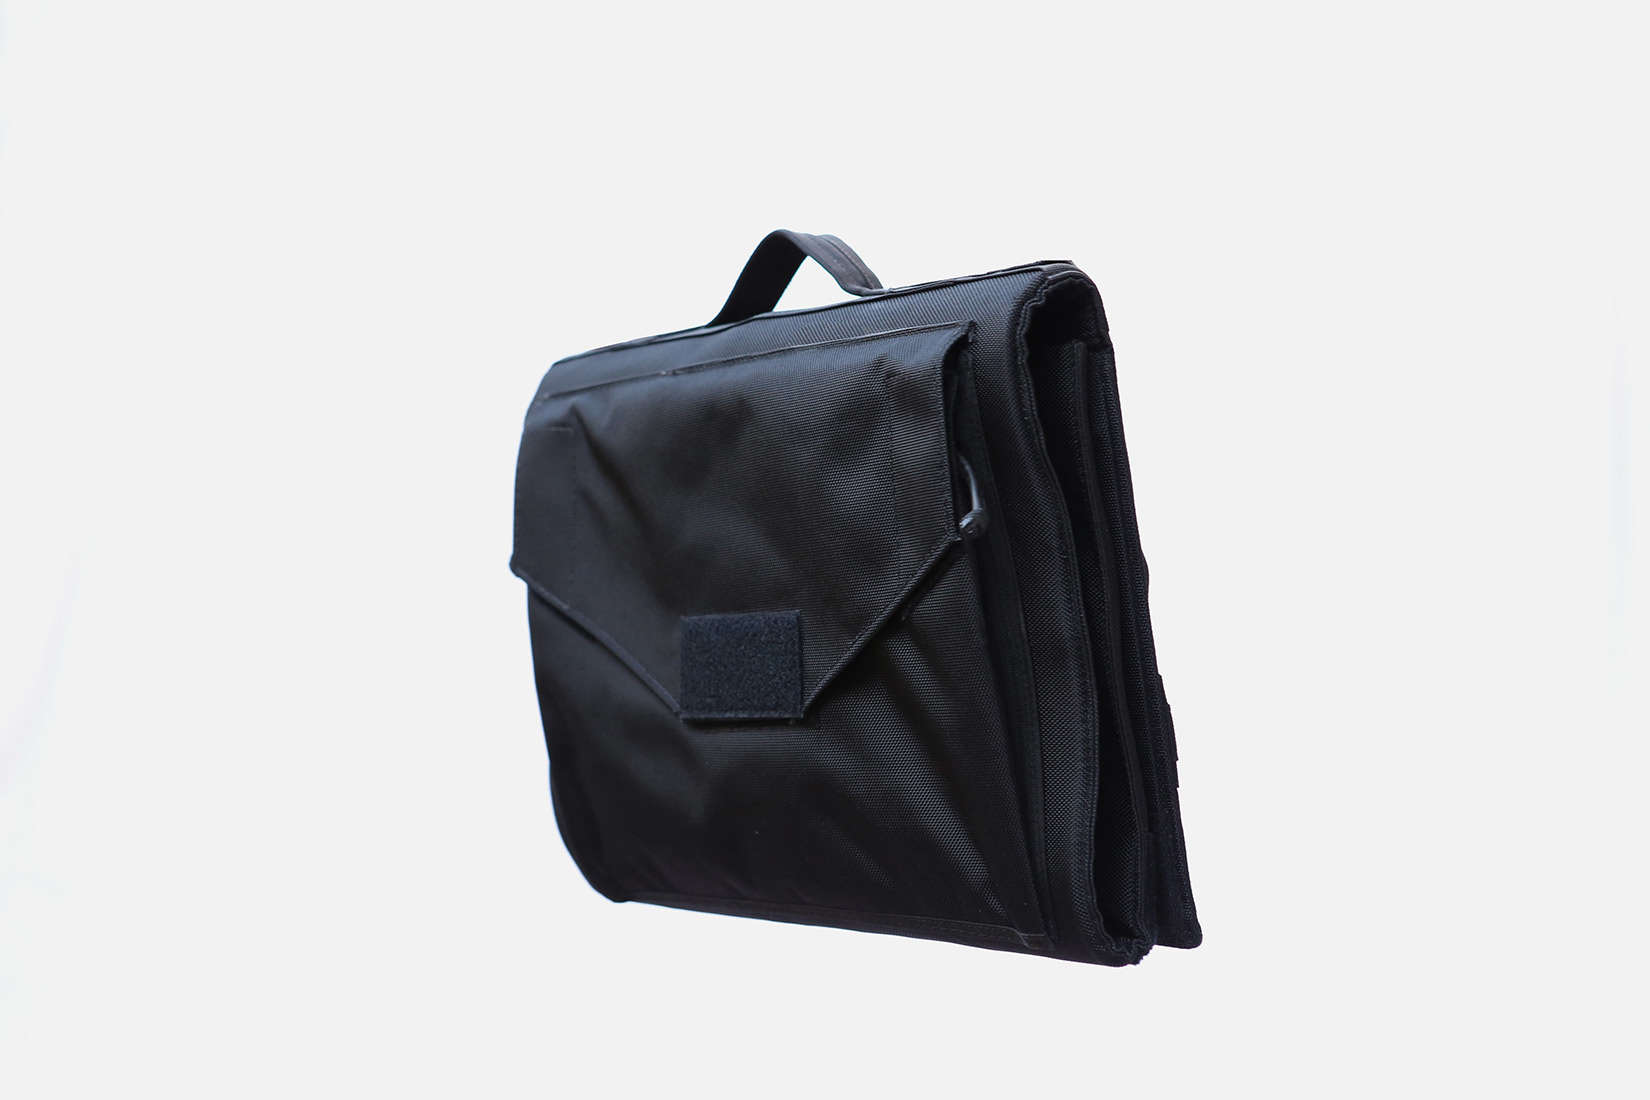 This shoulder bag protects your laptop - and body in case of gunfire.